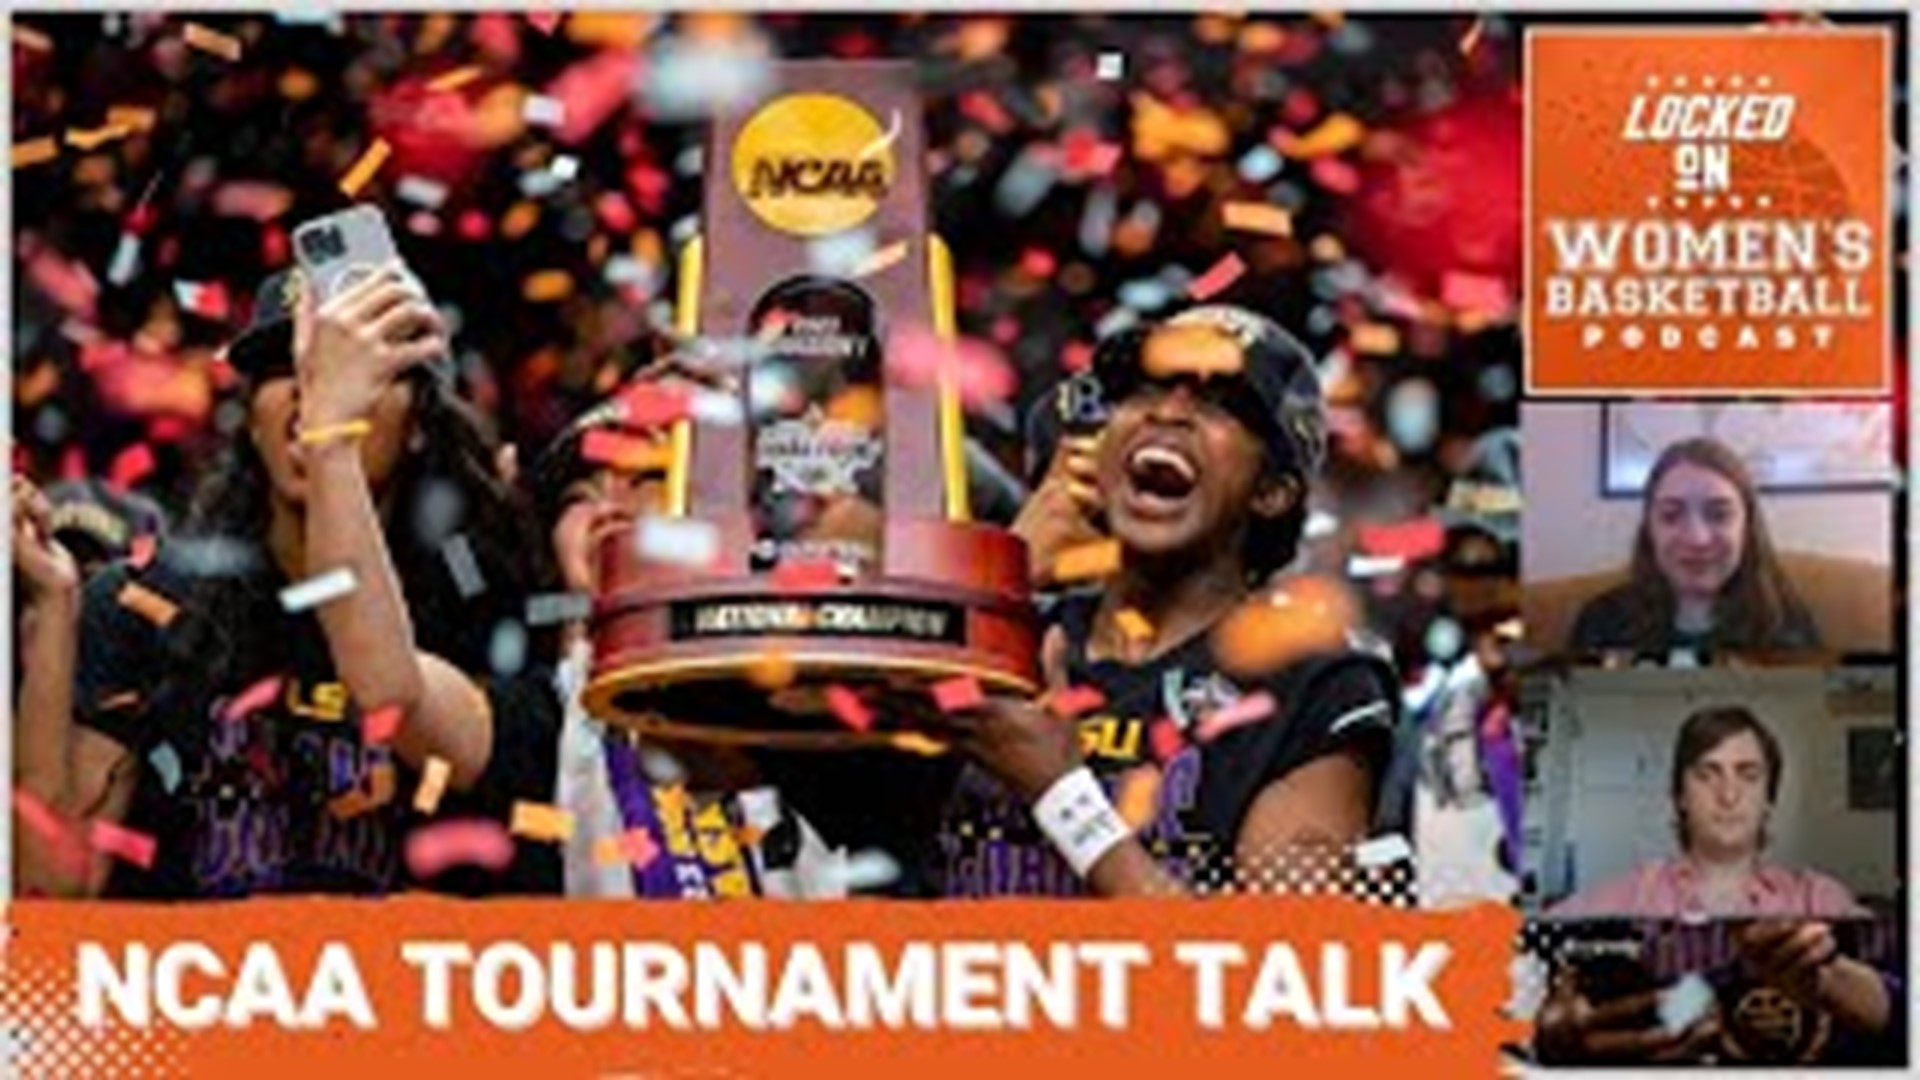 March Madness is here and the Round of 64 begins today. To celebrate, The Next’s Em Adler joins host Natalie Heavren to chat about  the bracket as a whole.